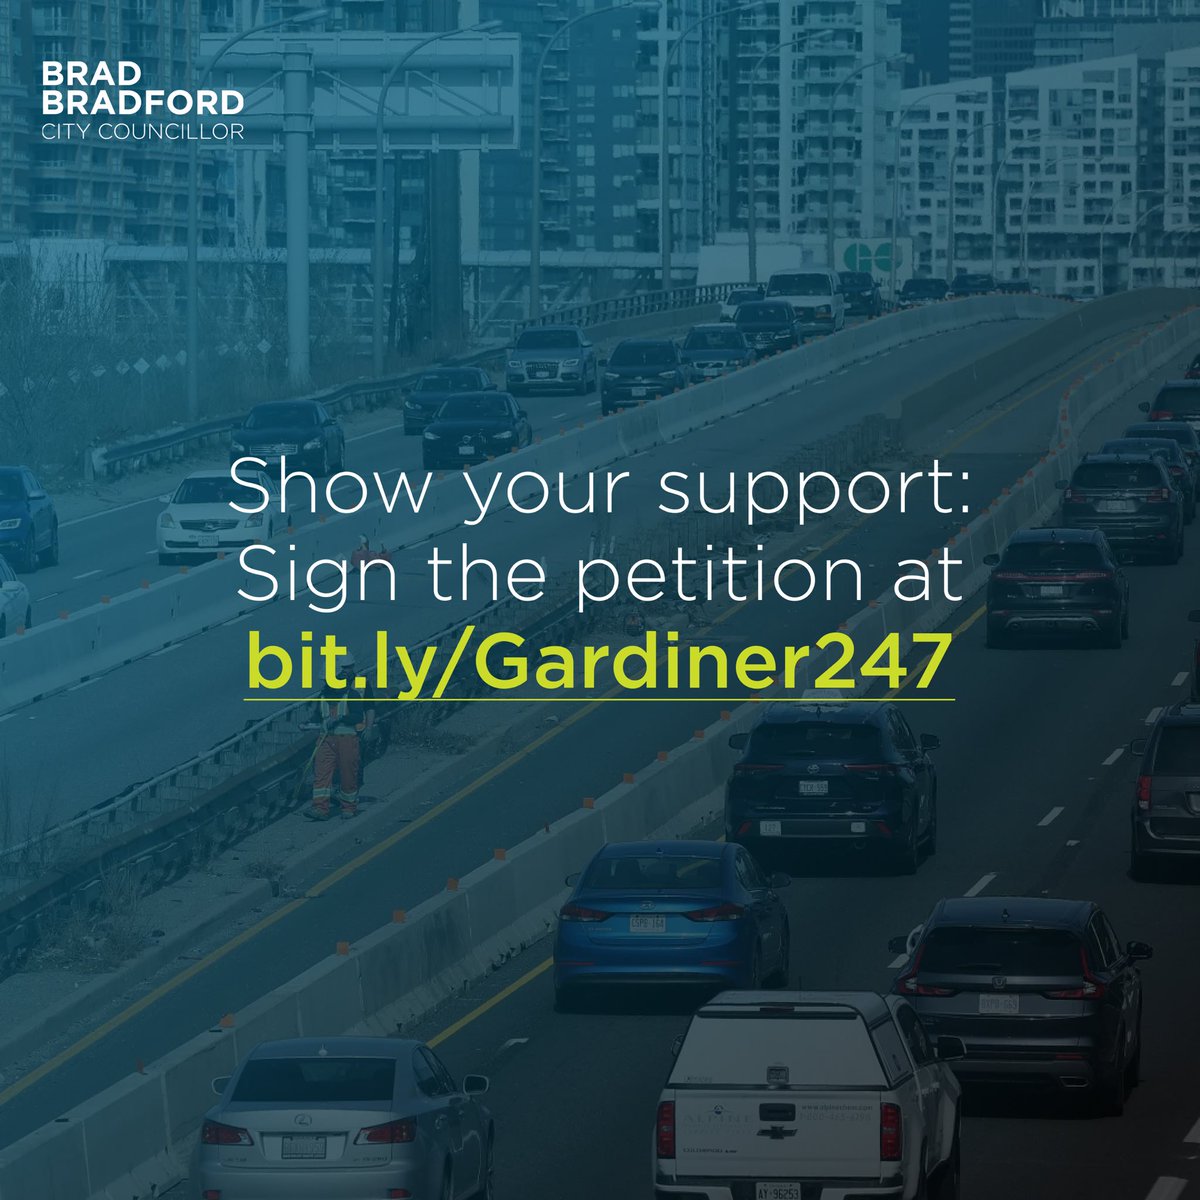 The Gardiner gridlock has to stop. Travel times on the Gardiner Expressway have doubled in recent weeks and this not only affects local businesses, but it compromises the quality of life of the million of Torontonians who commute daily. That is why I will be presenting a motion